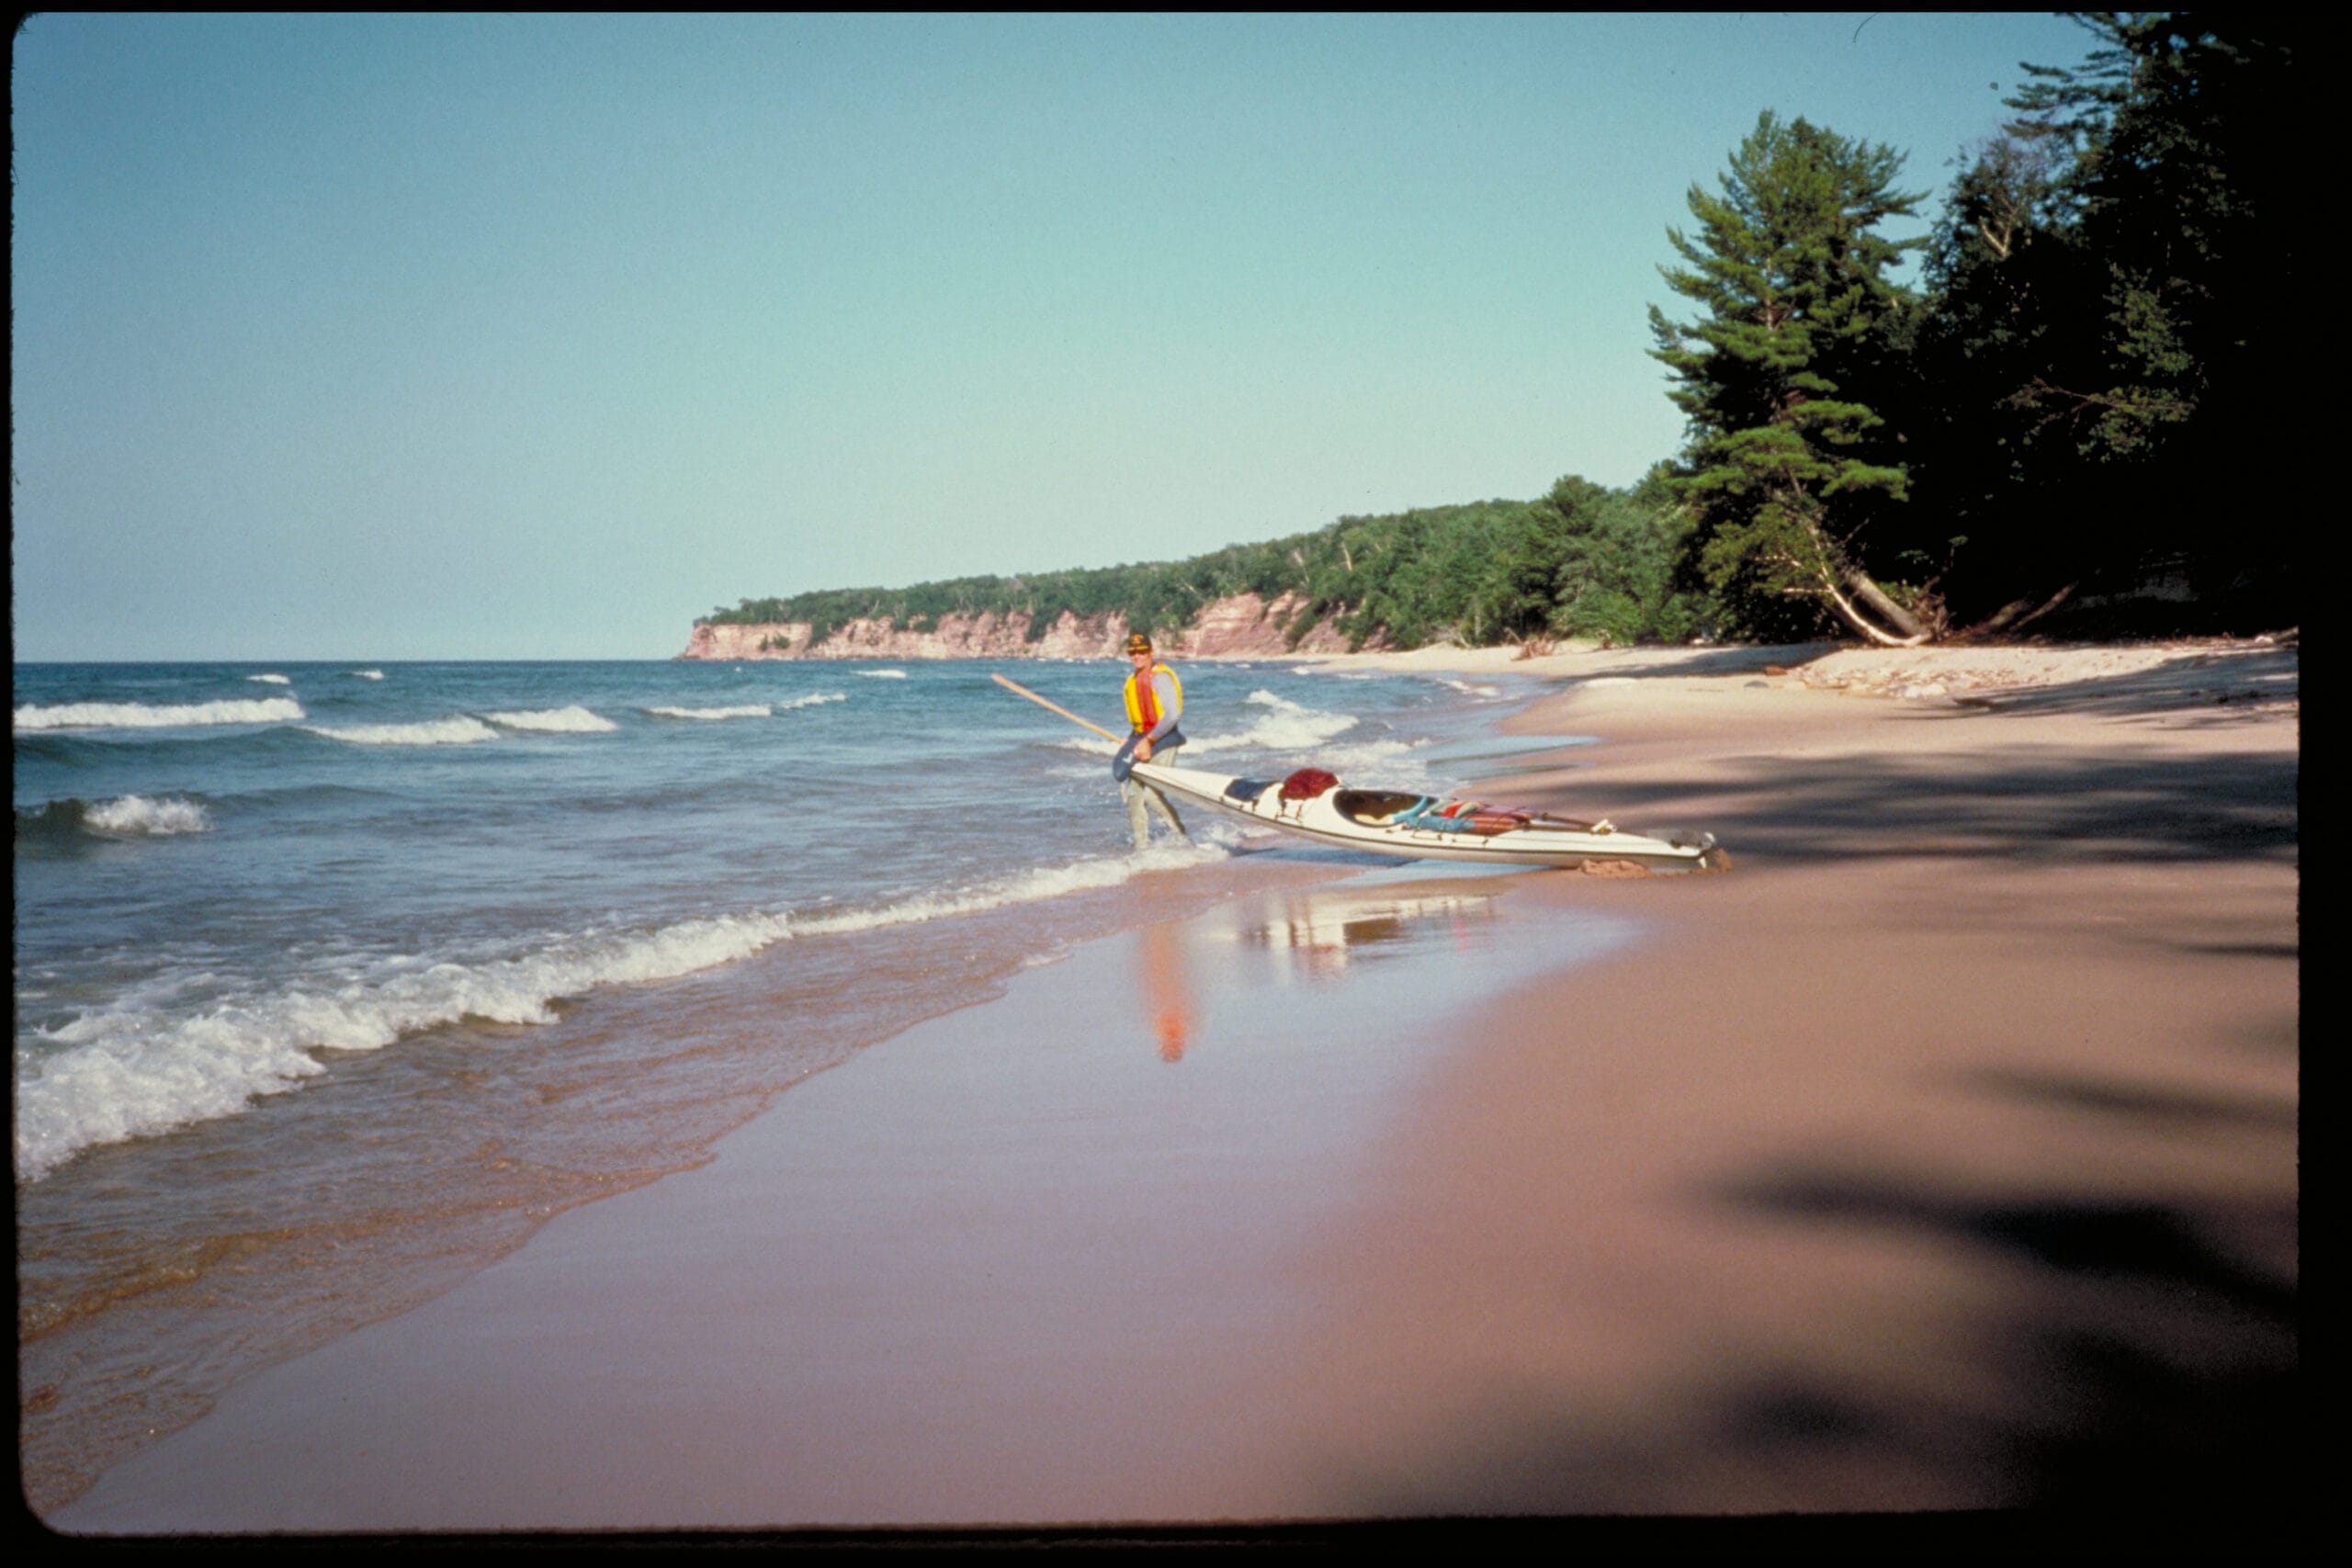 A person is paddling a canoe on a beach.